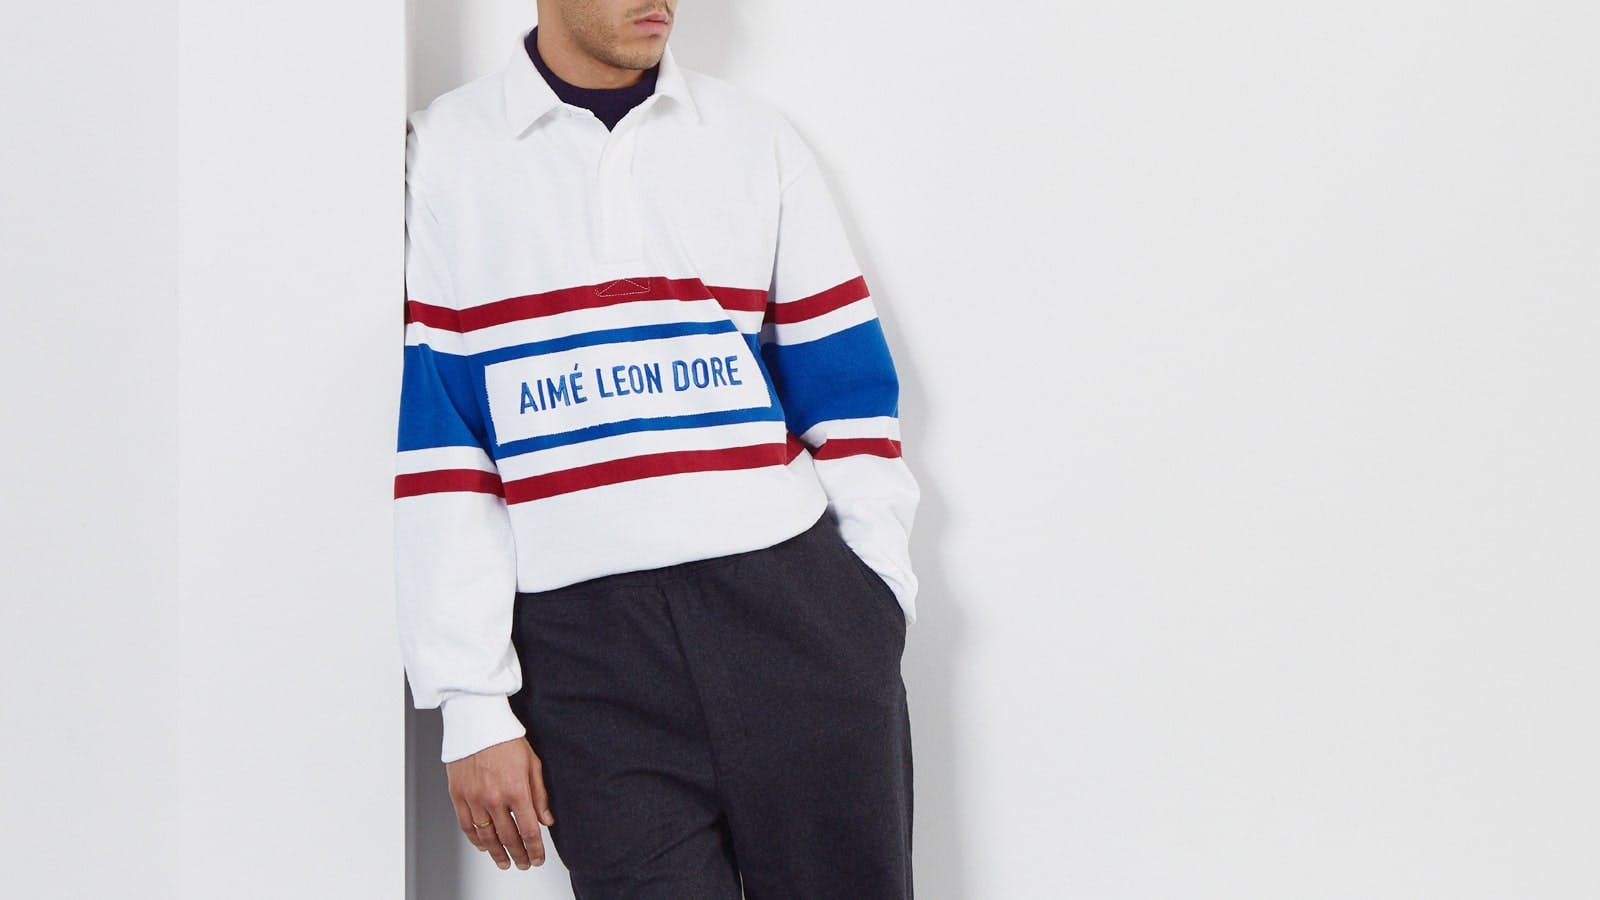 Check out the latest drop from Aimé Leon Dore